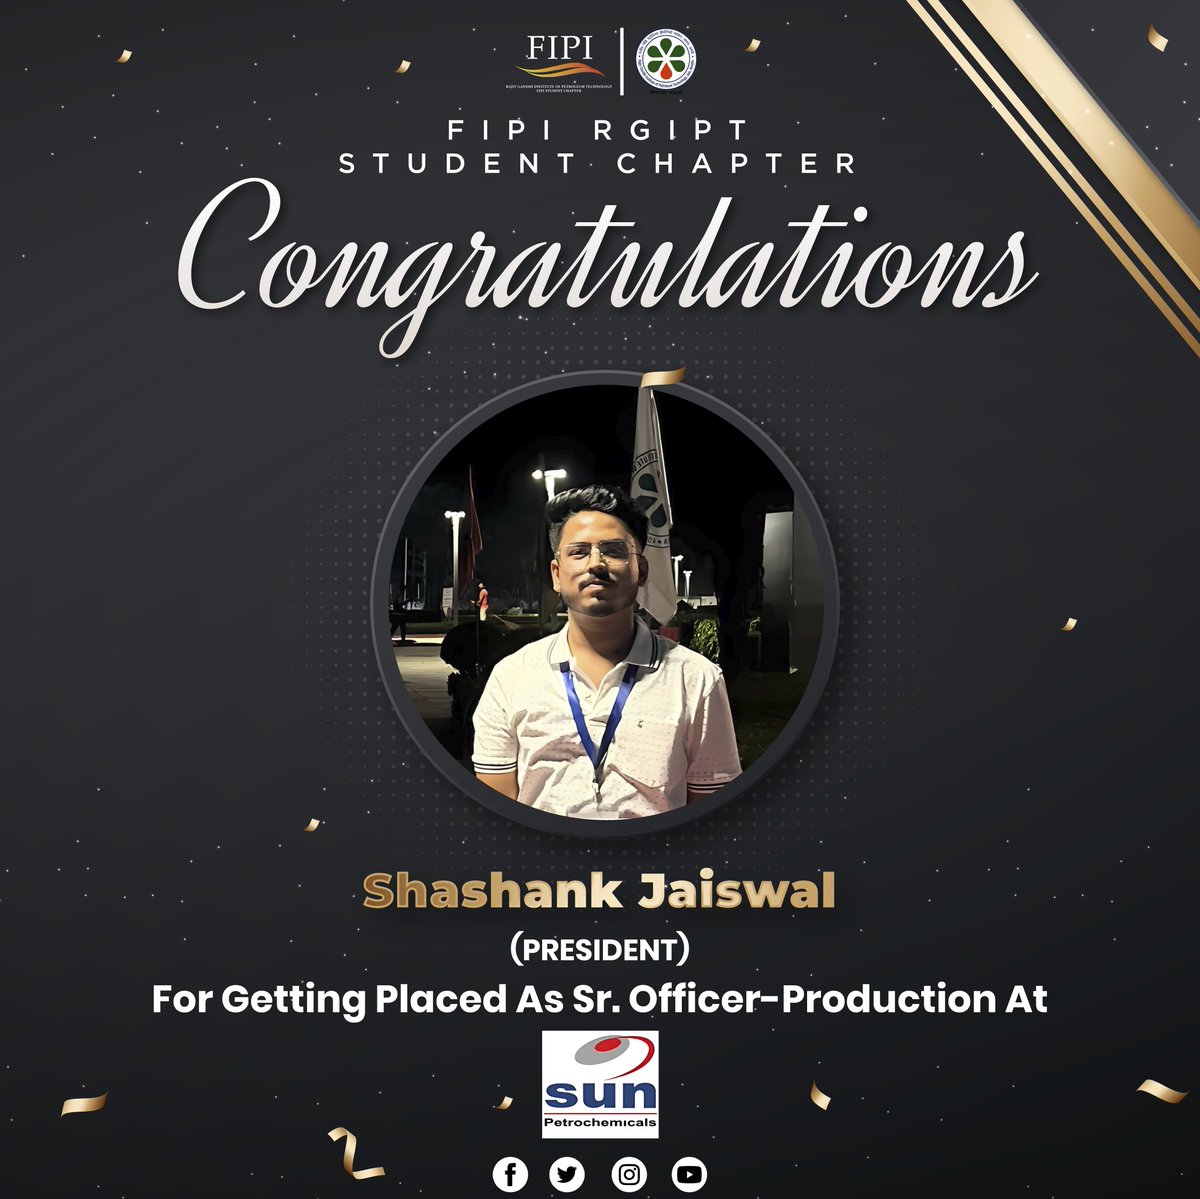 'Success is the result of perfection, hard work, learning from failure, and persistence.'

Greetings from FIPI RGIPT SC!

We are delighted to announce that our President, Mr. Shashank Jaiswal, has been placed as an Officer-Production at SunPetro.